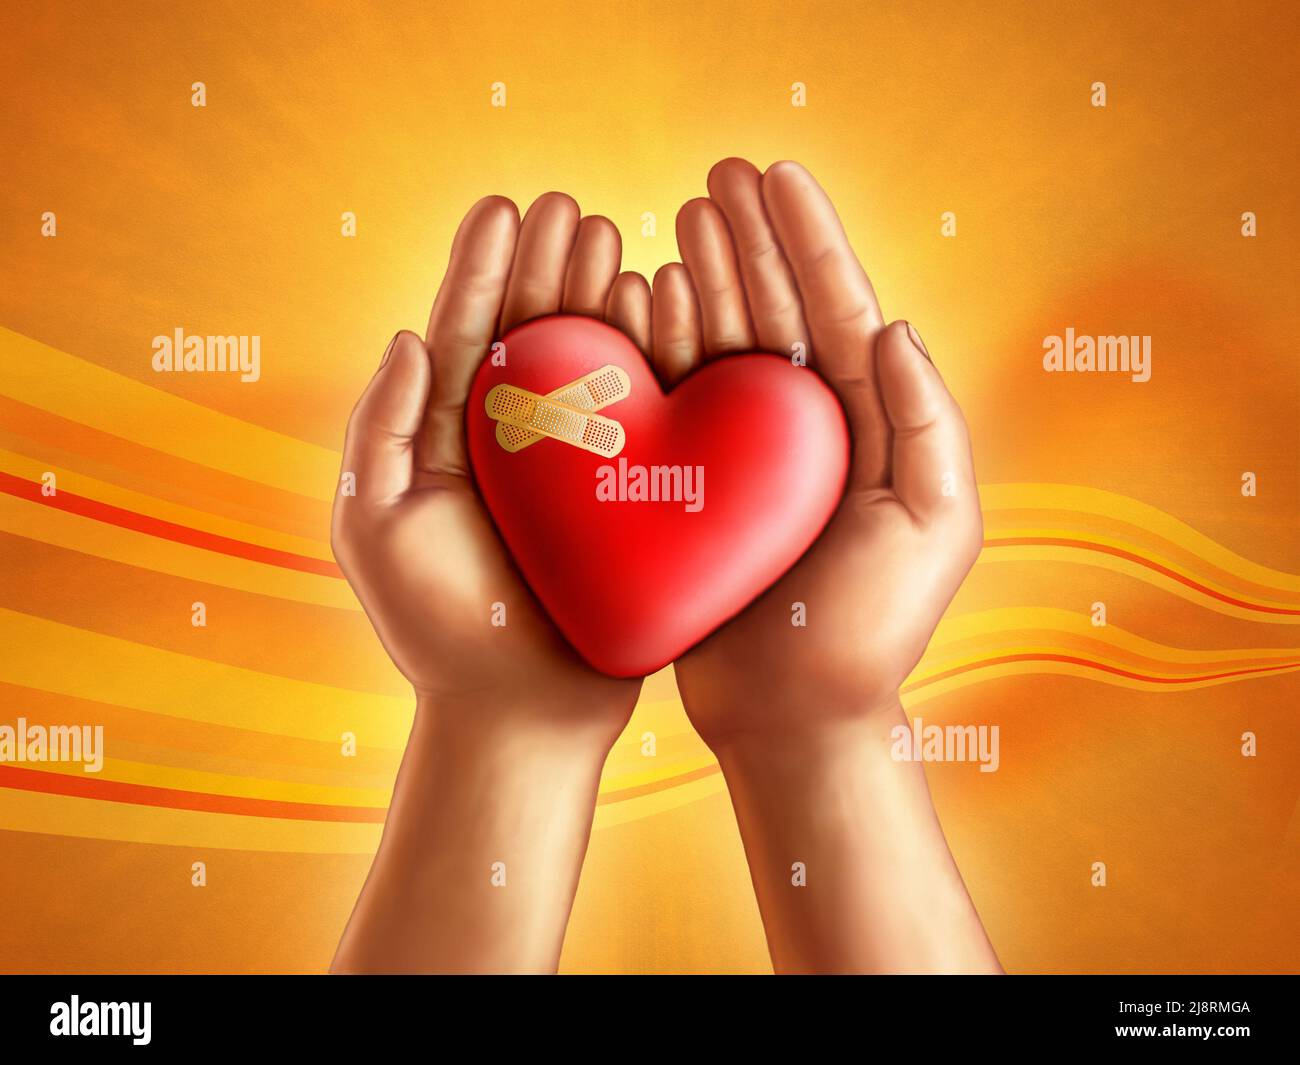 Hands holding a broken hearth, care and compassion concept. Digital illustration. Stock Photo